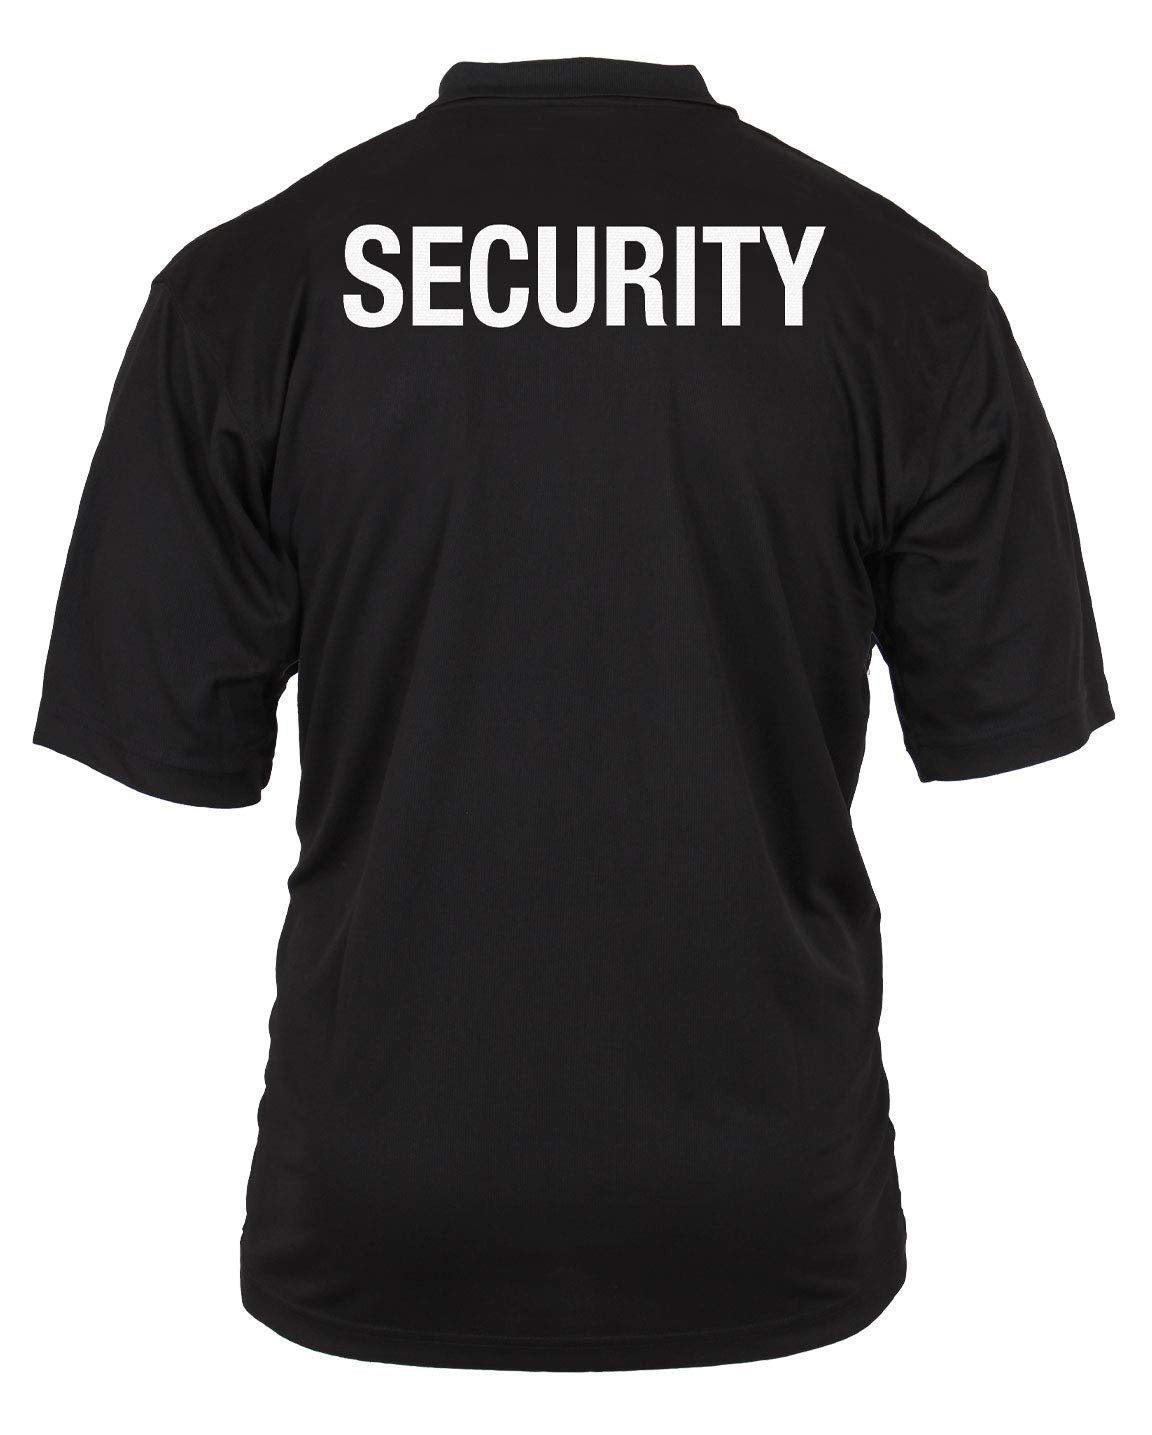 Rothco Moisture Wicking Security Polo Shirt With Back Print Only